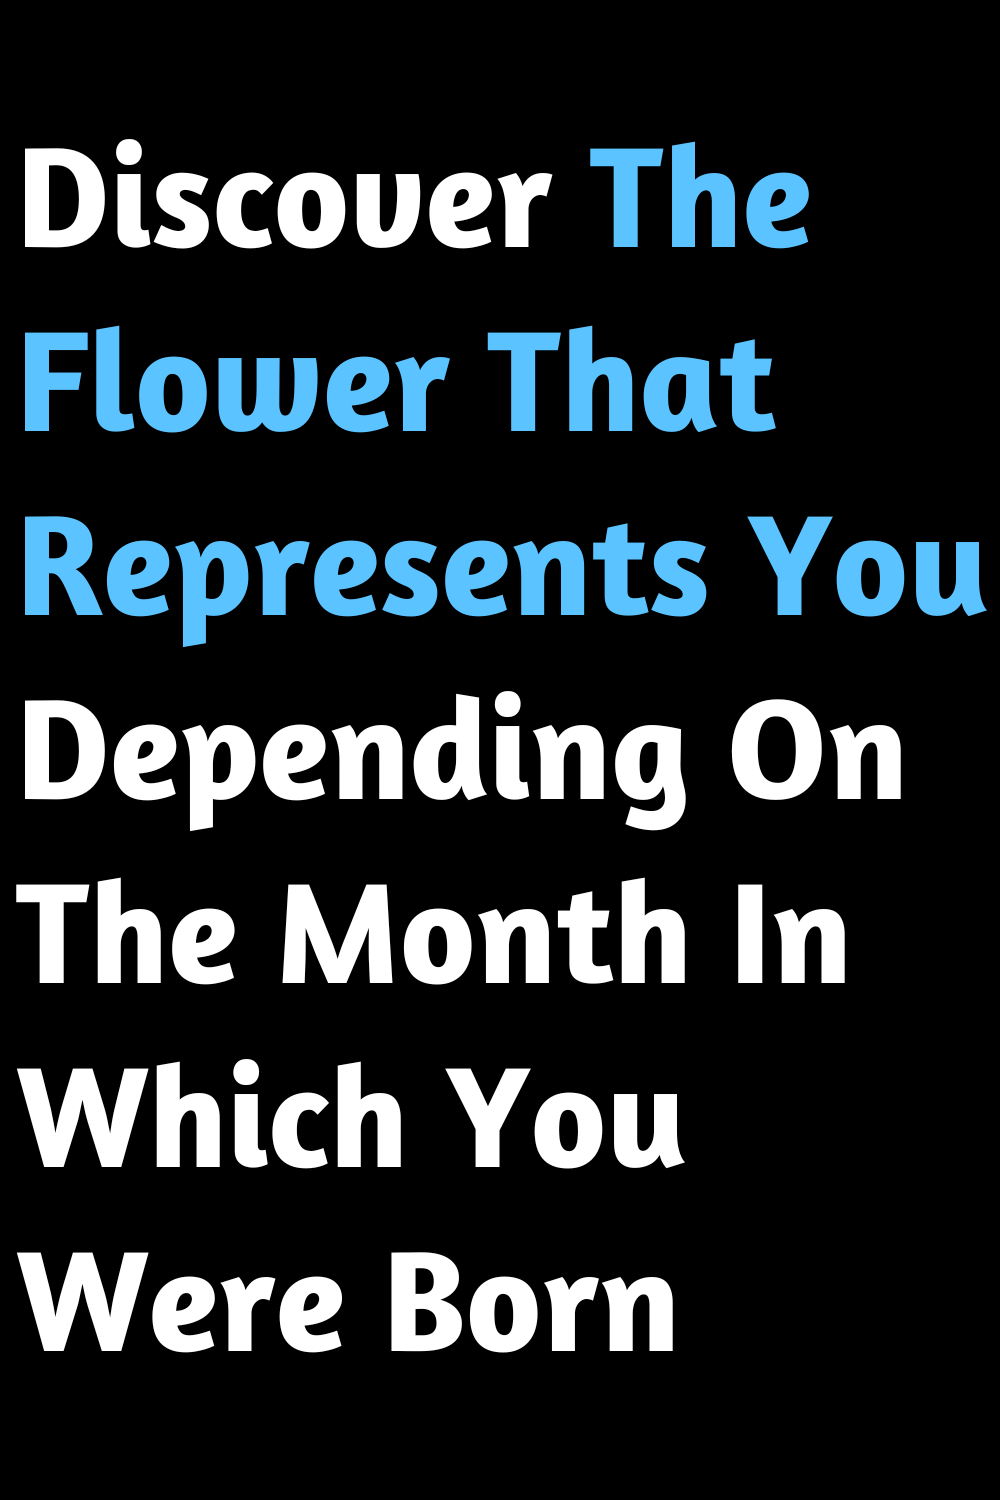 Discover The Flower That Represents You Depending On The Month In Which You Were Born